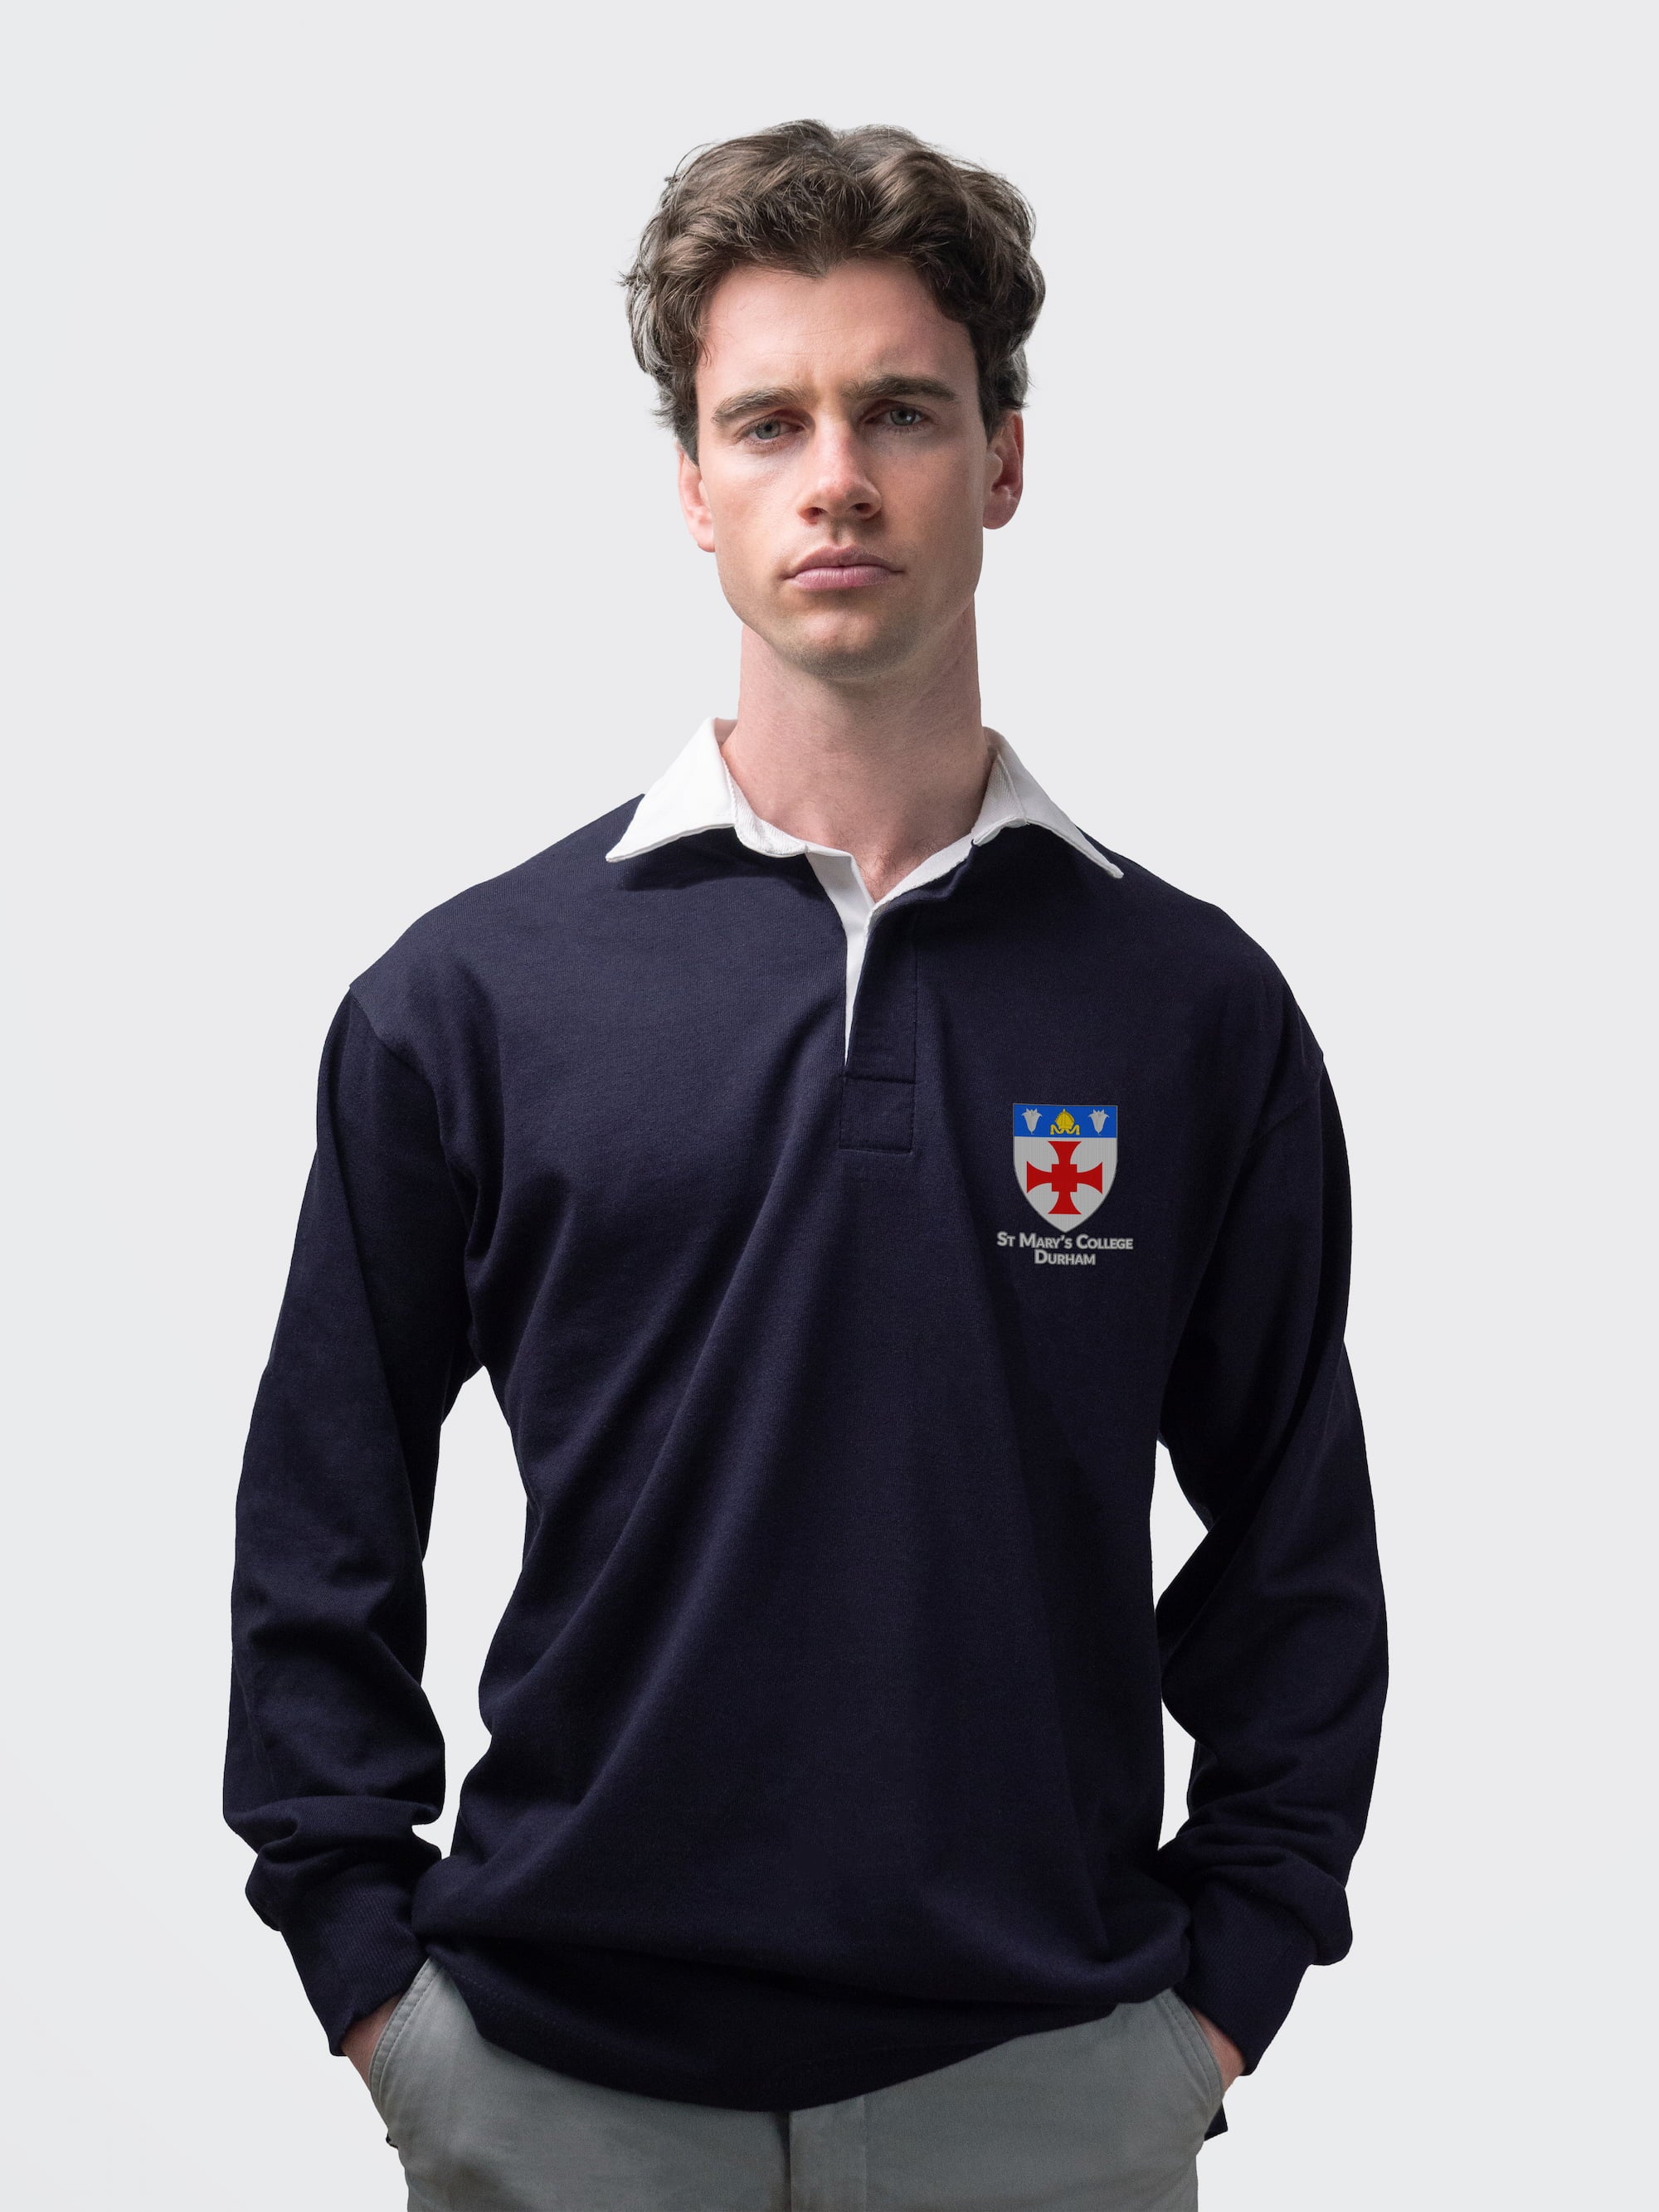 St Mary's student wearing an embroidered mens rugby shirt in navy